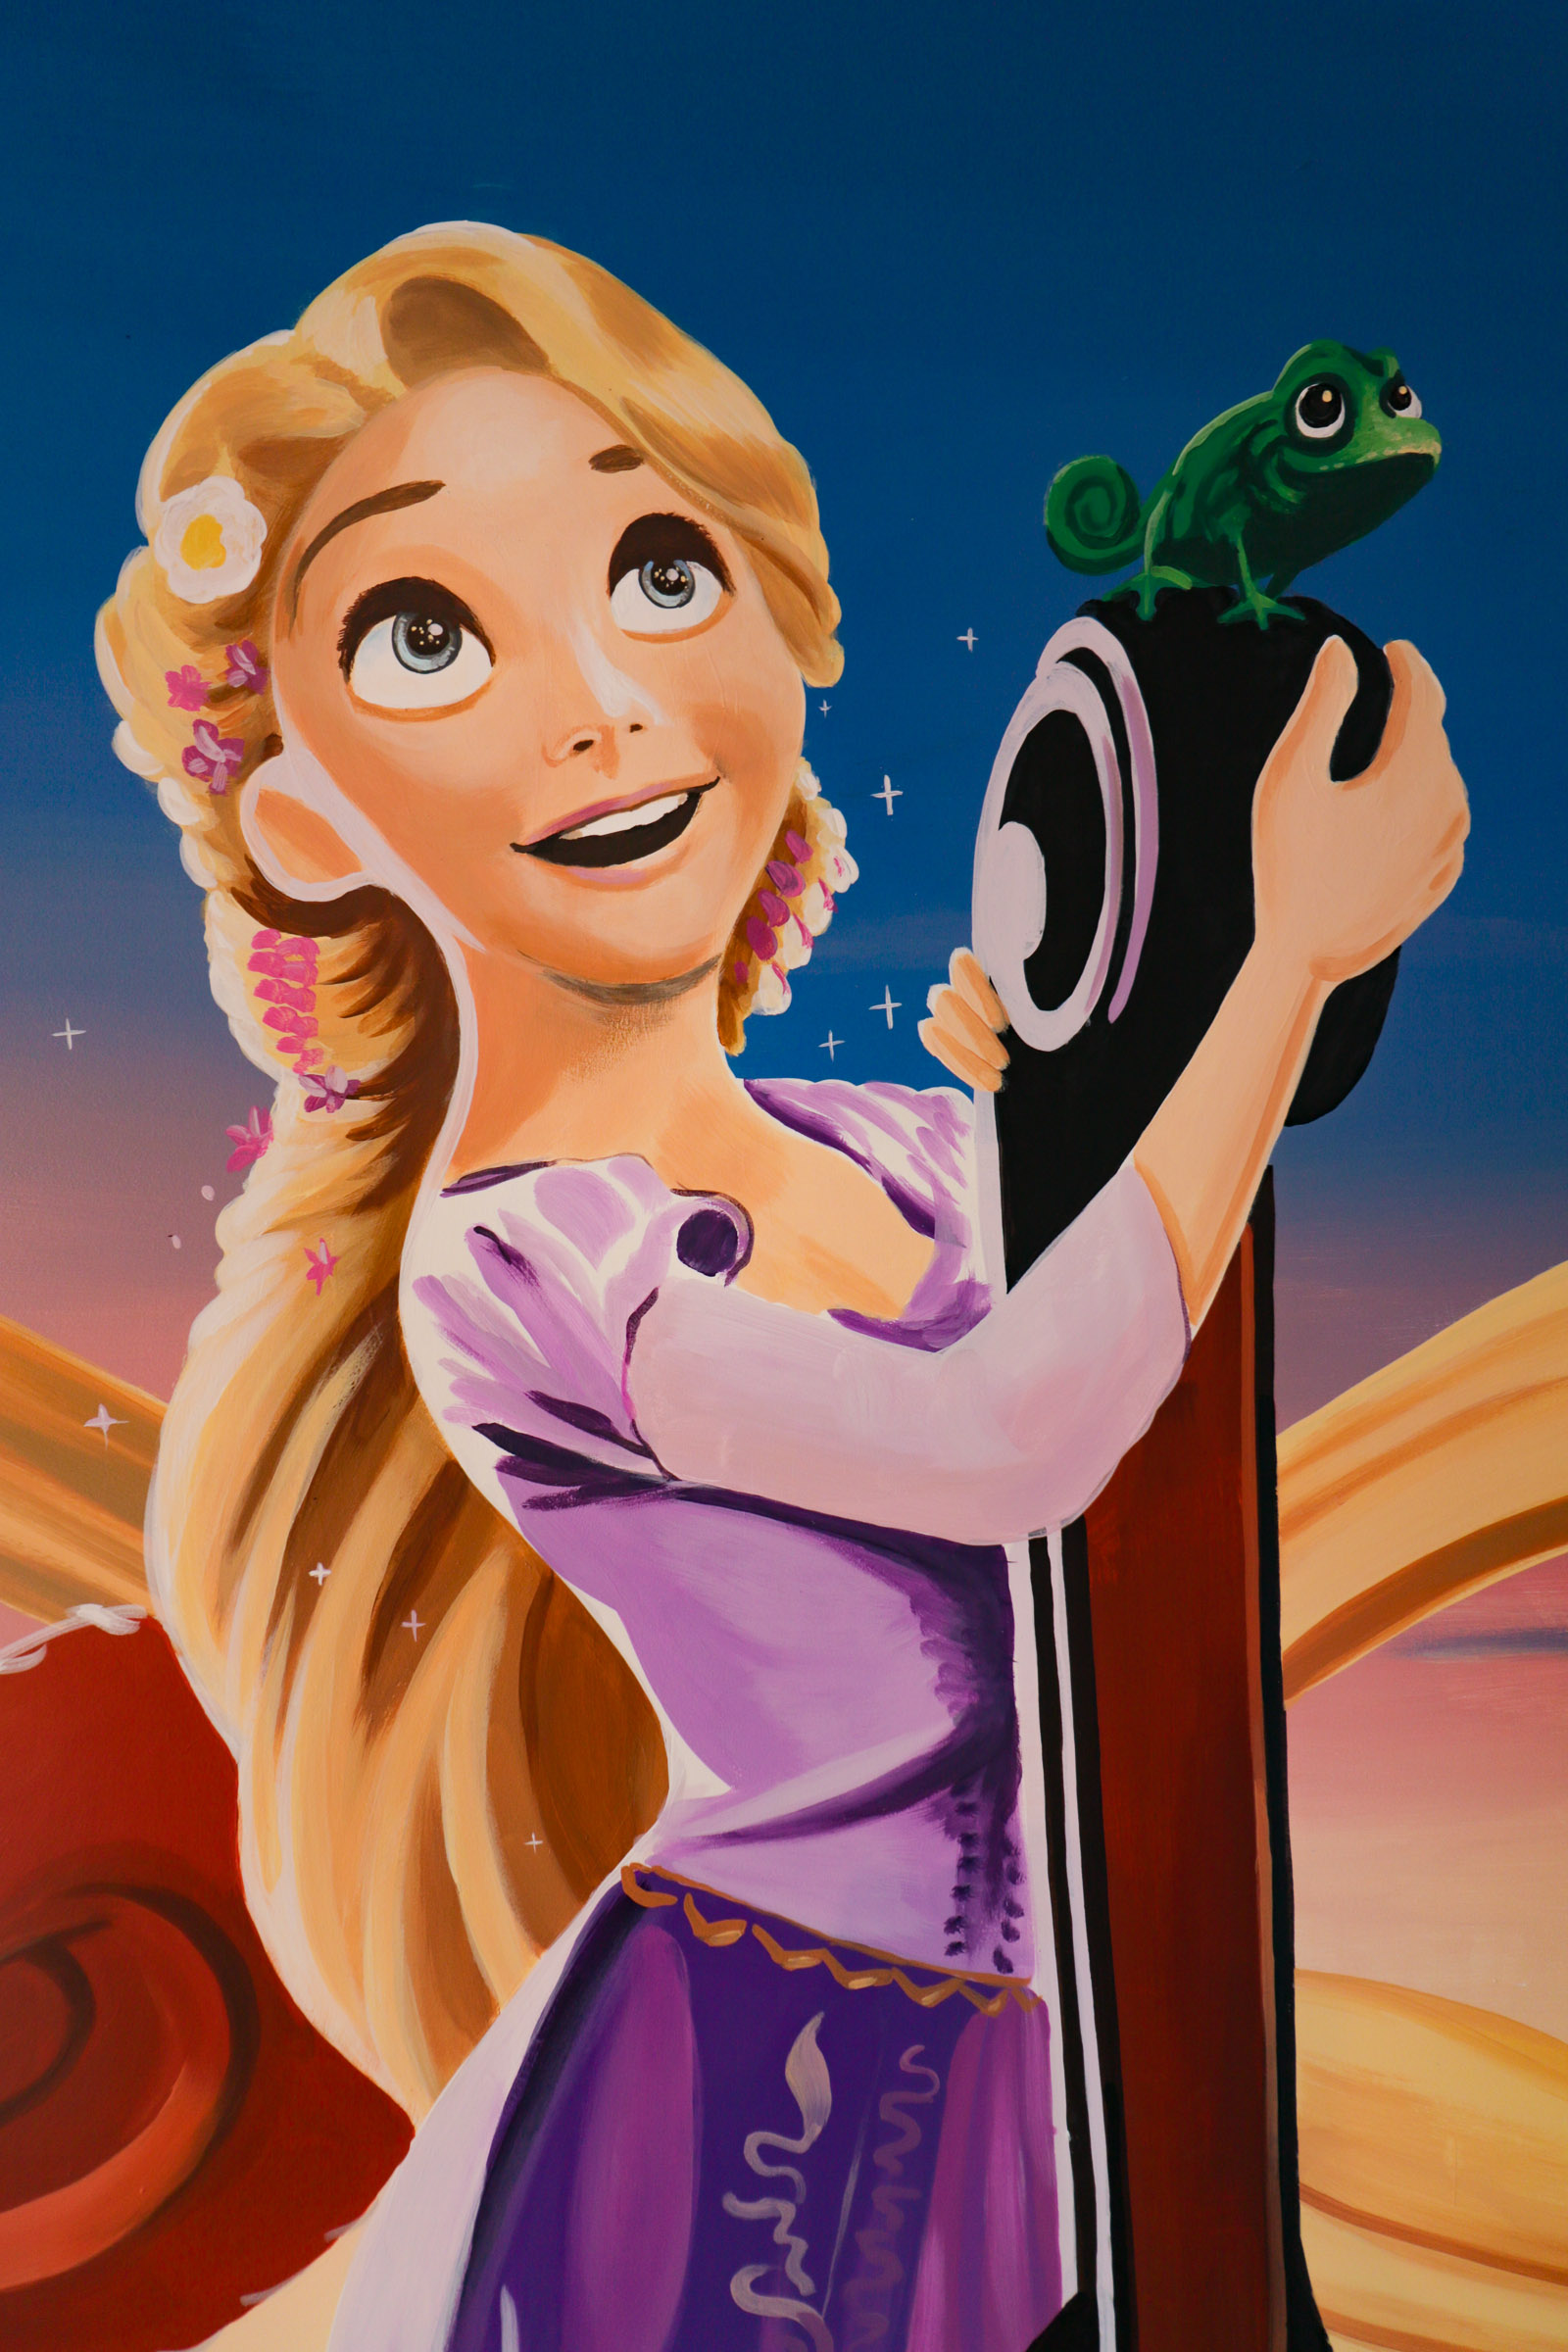 Pascal's moment captured with Rapunzel in this close up detail of the Tangled Mural